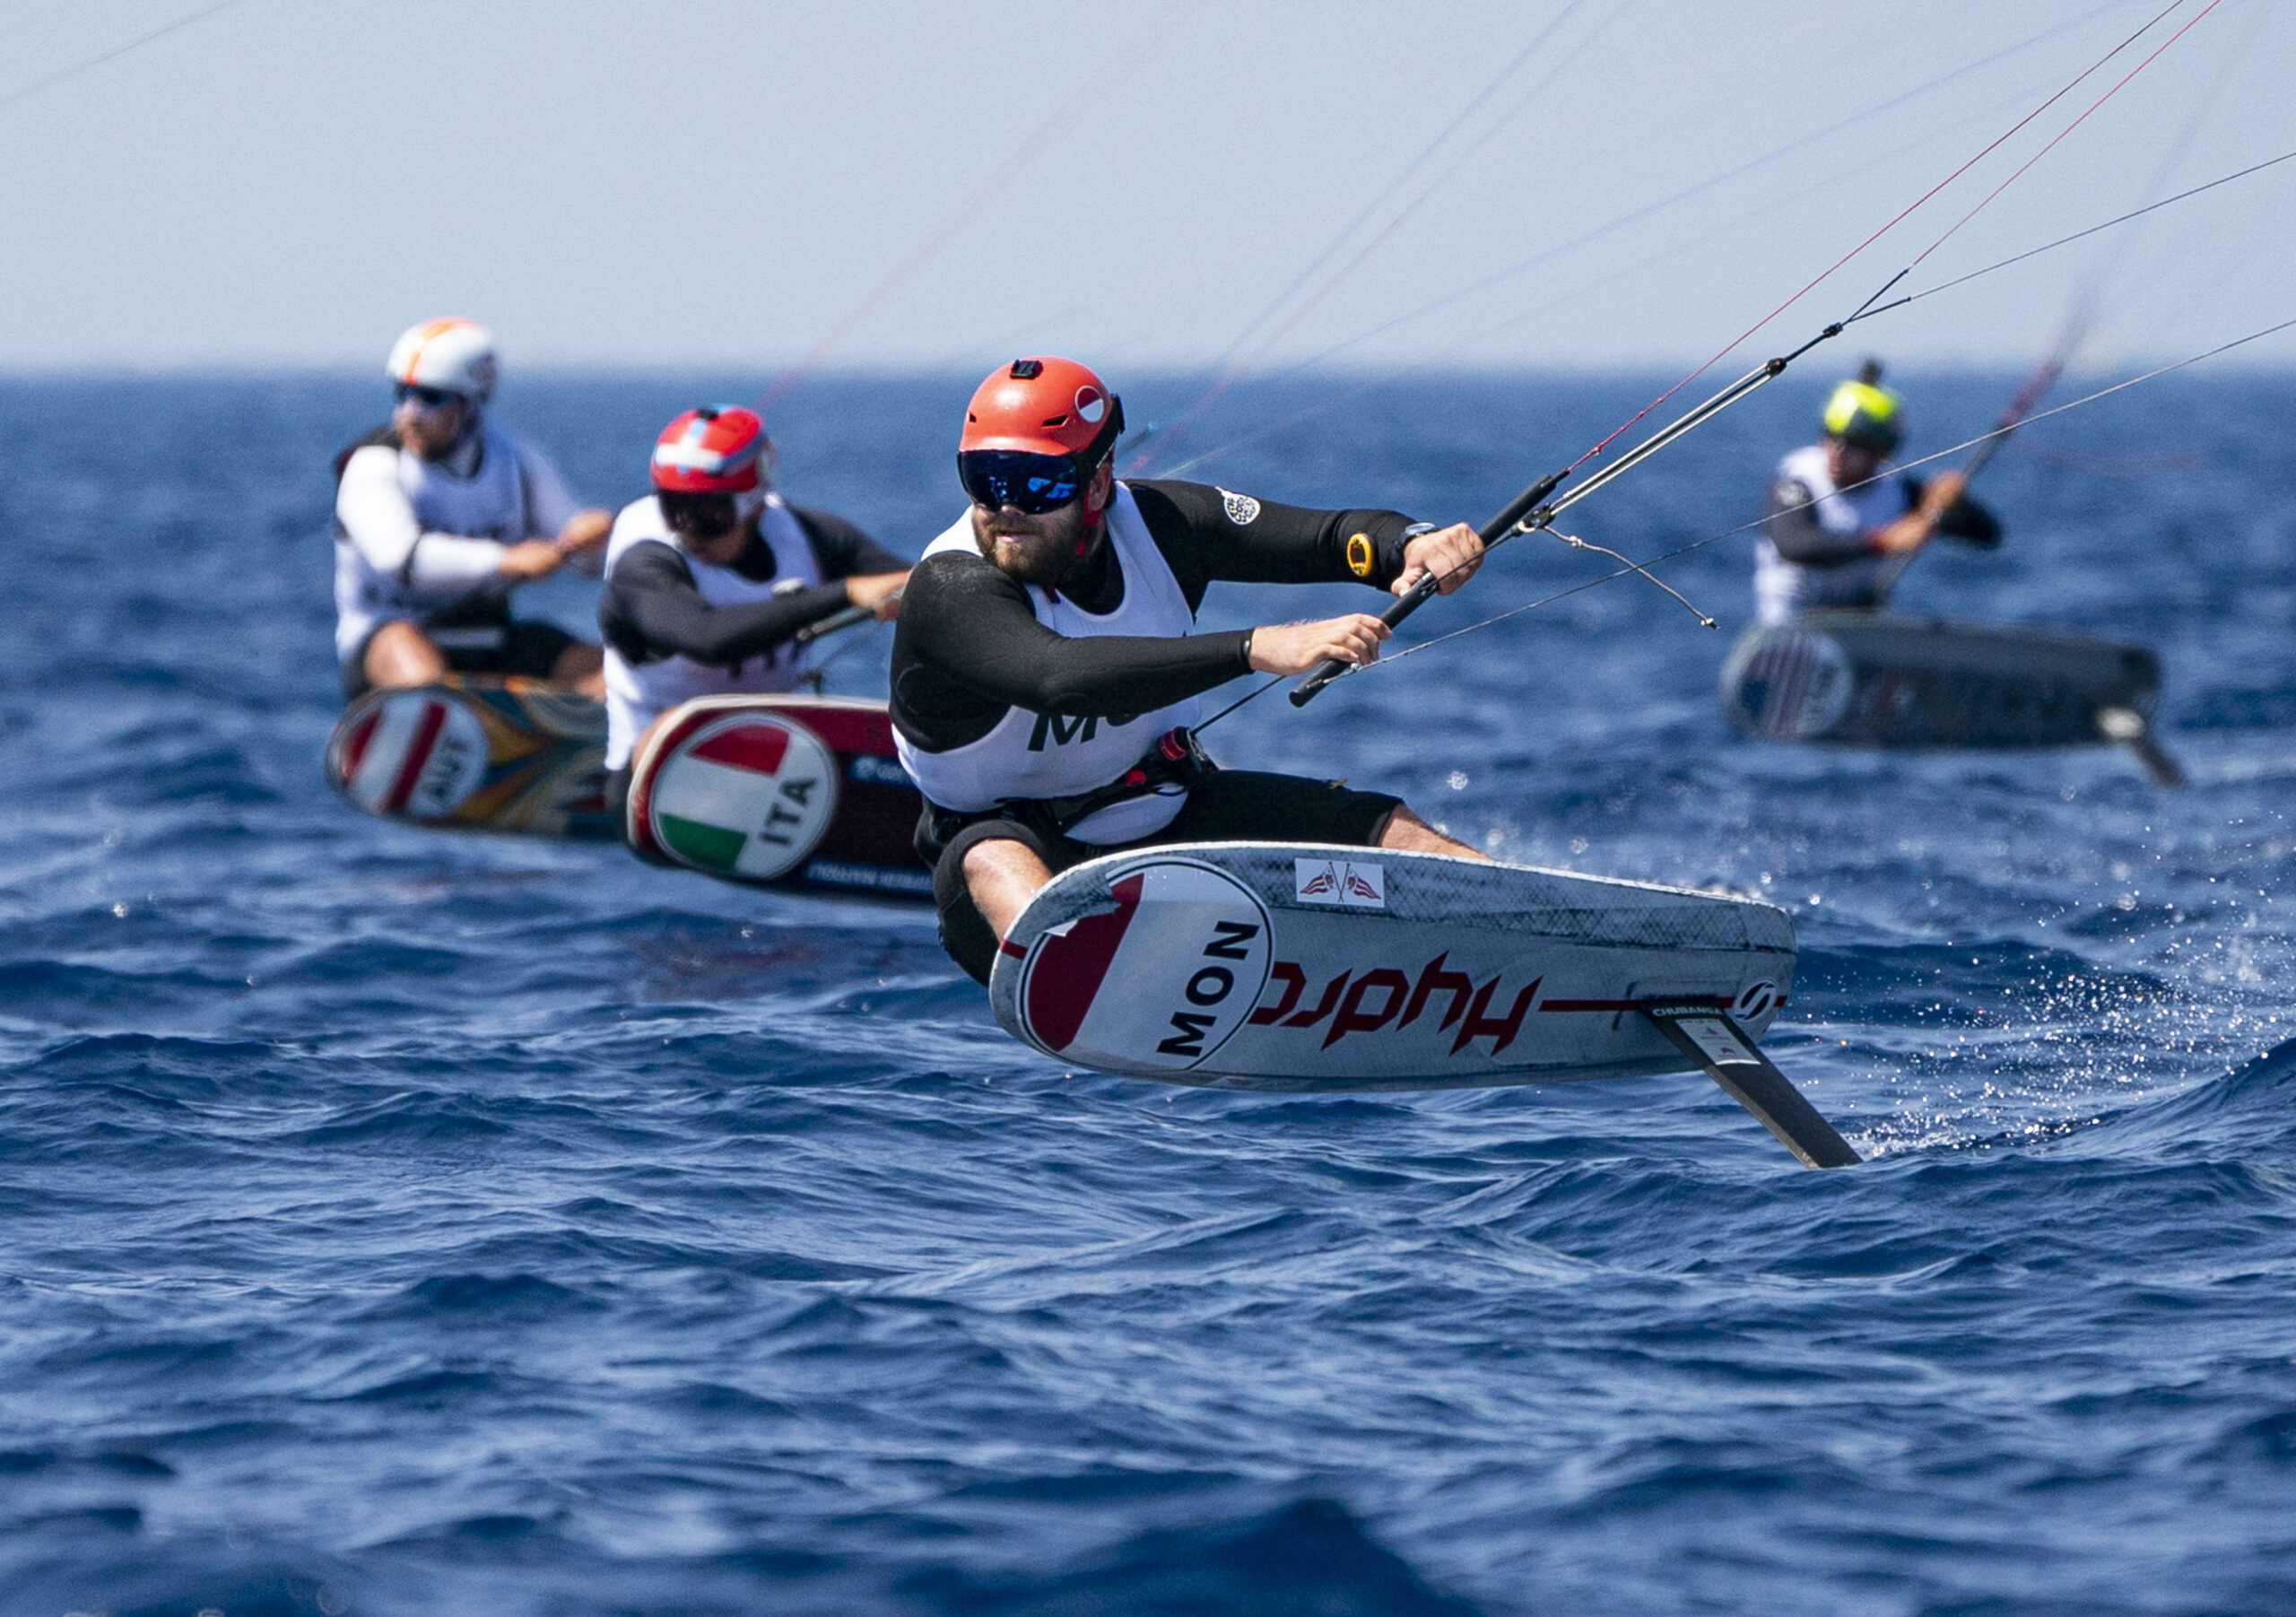 Exciting races on the first day of the Paris 2024 sailing test event